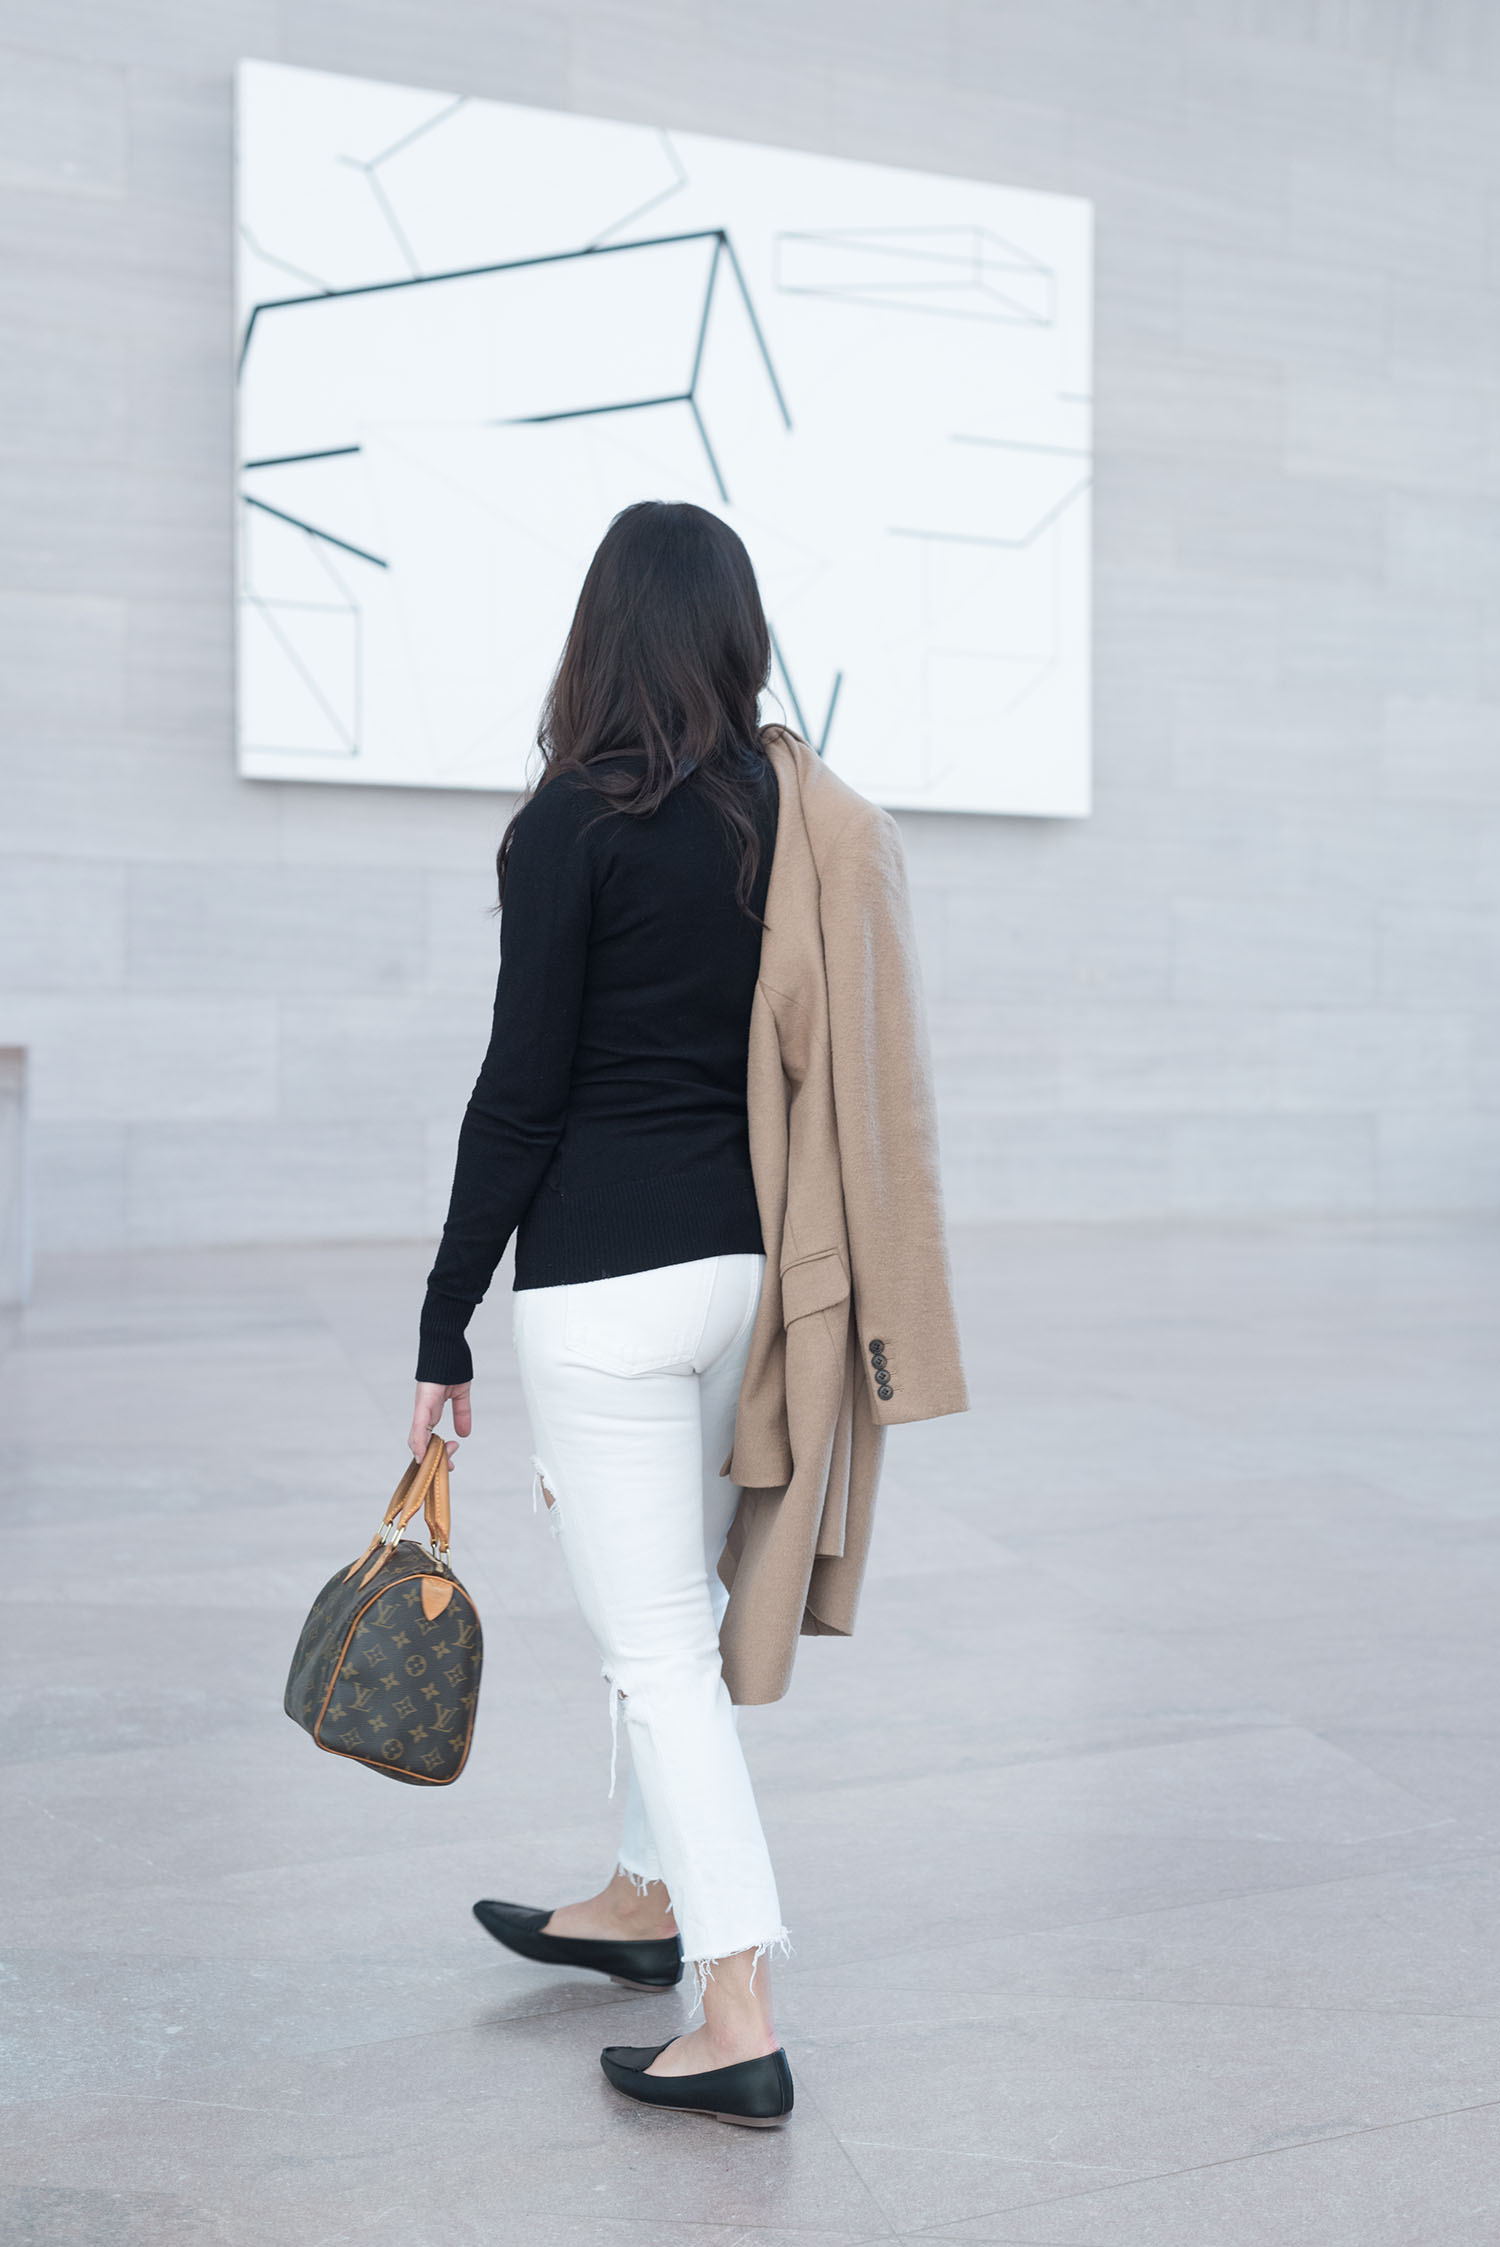 Fashion blogger Cee Fardoe of Coco & Vera walks in the National Gallery of Art in Washington DC wearing a Le Chateau turtleneck sweater and carrying a Louis Vuitton Speedy 25 handbag